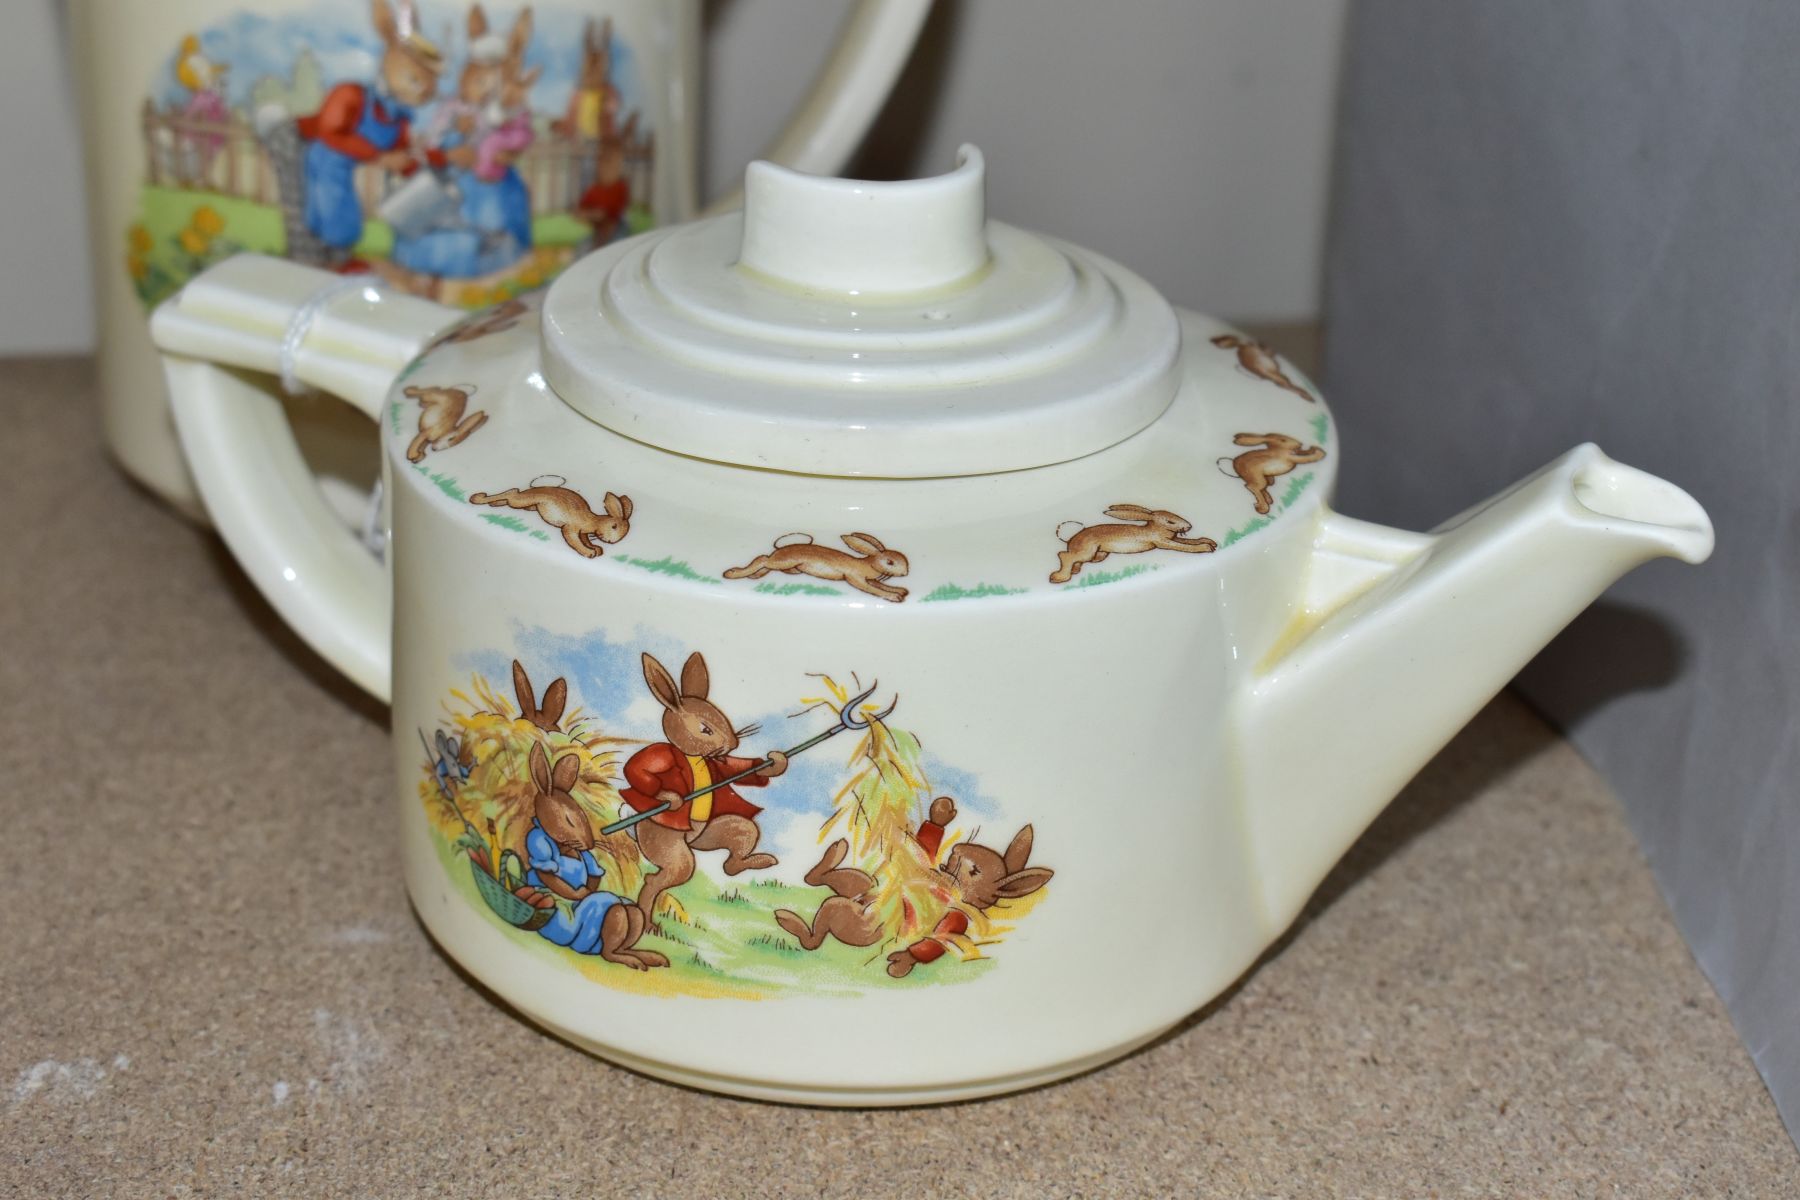 FIVE PIECES OF ROYAL DOULTON BUNNYKINS EARTHENWARE TABLEWARE, designed by Walter Hayward after - Image 6 of 10